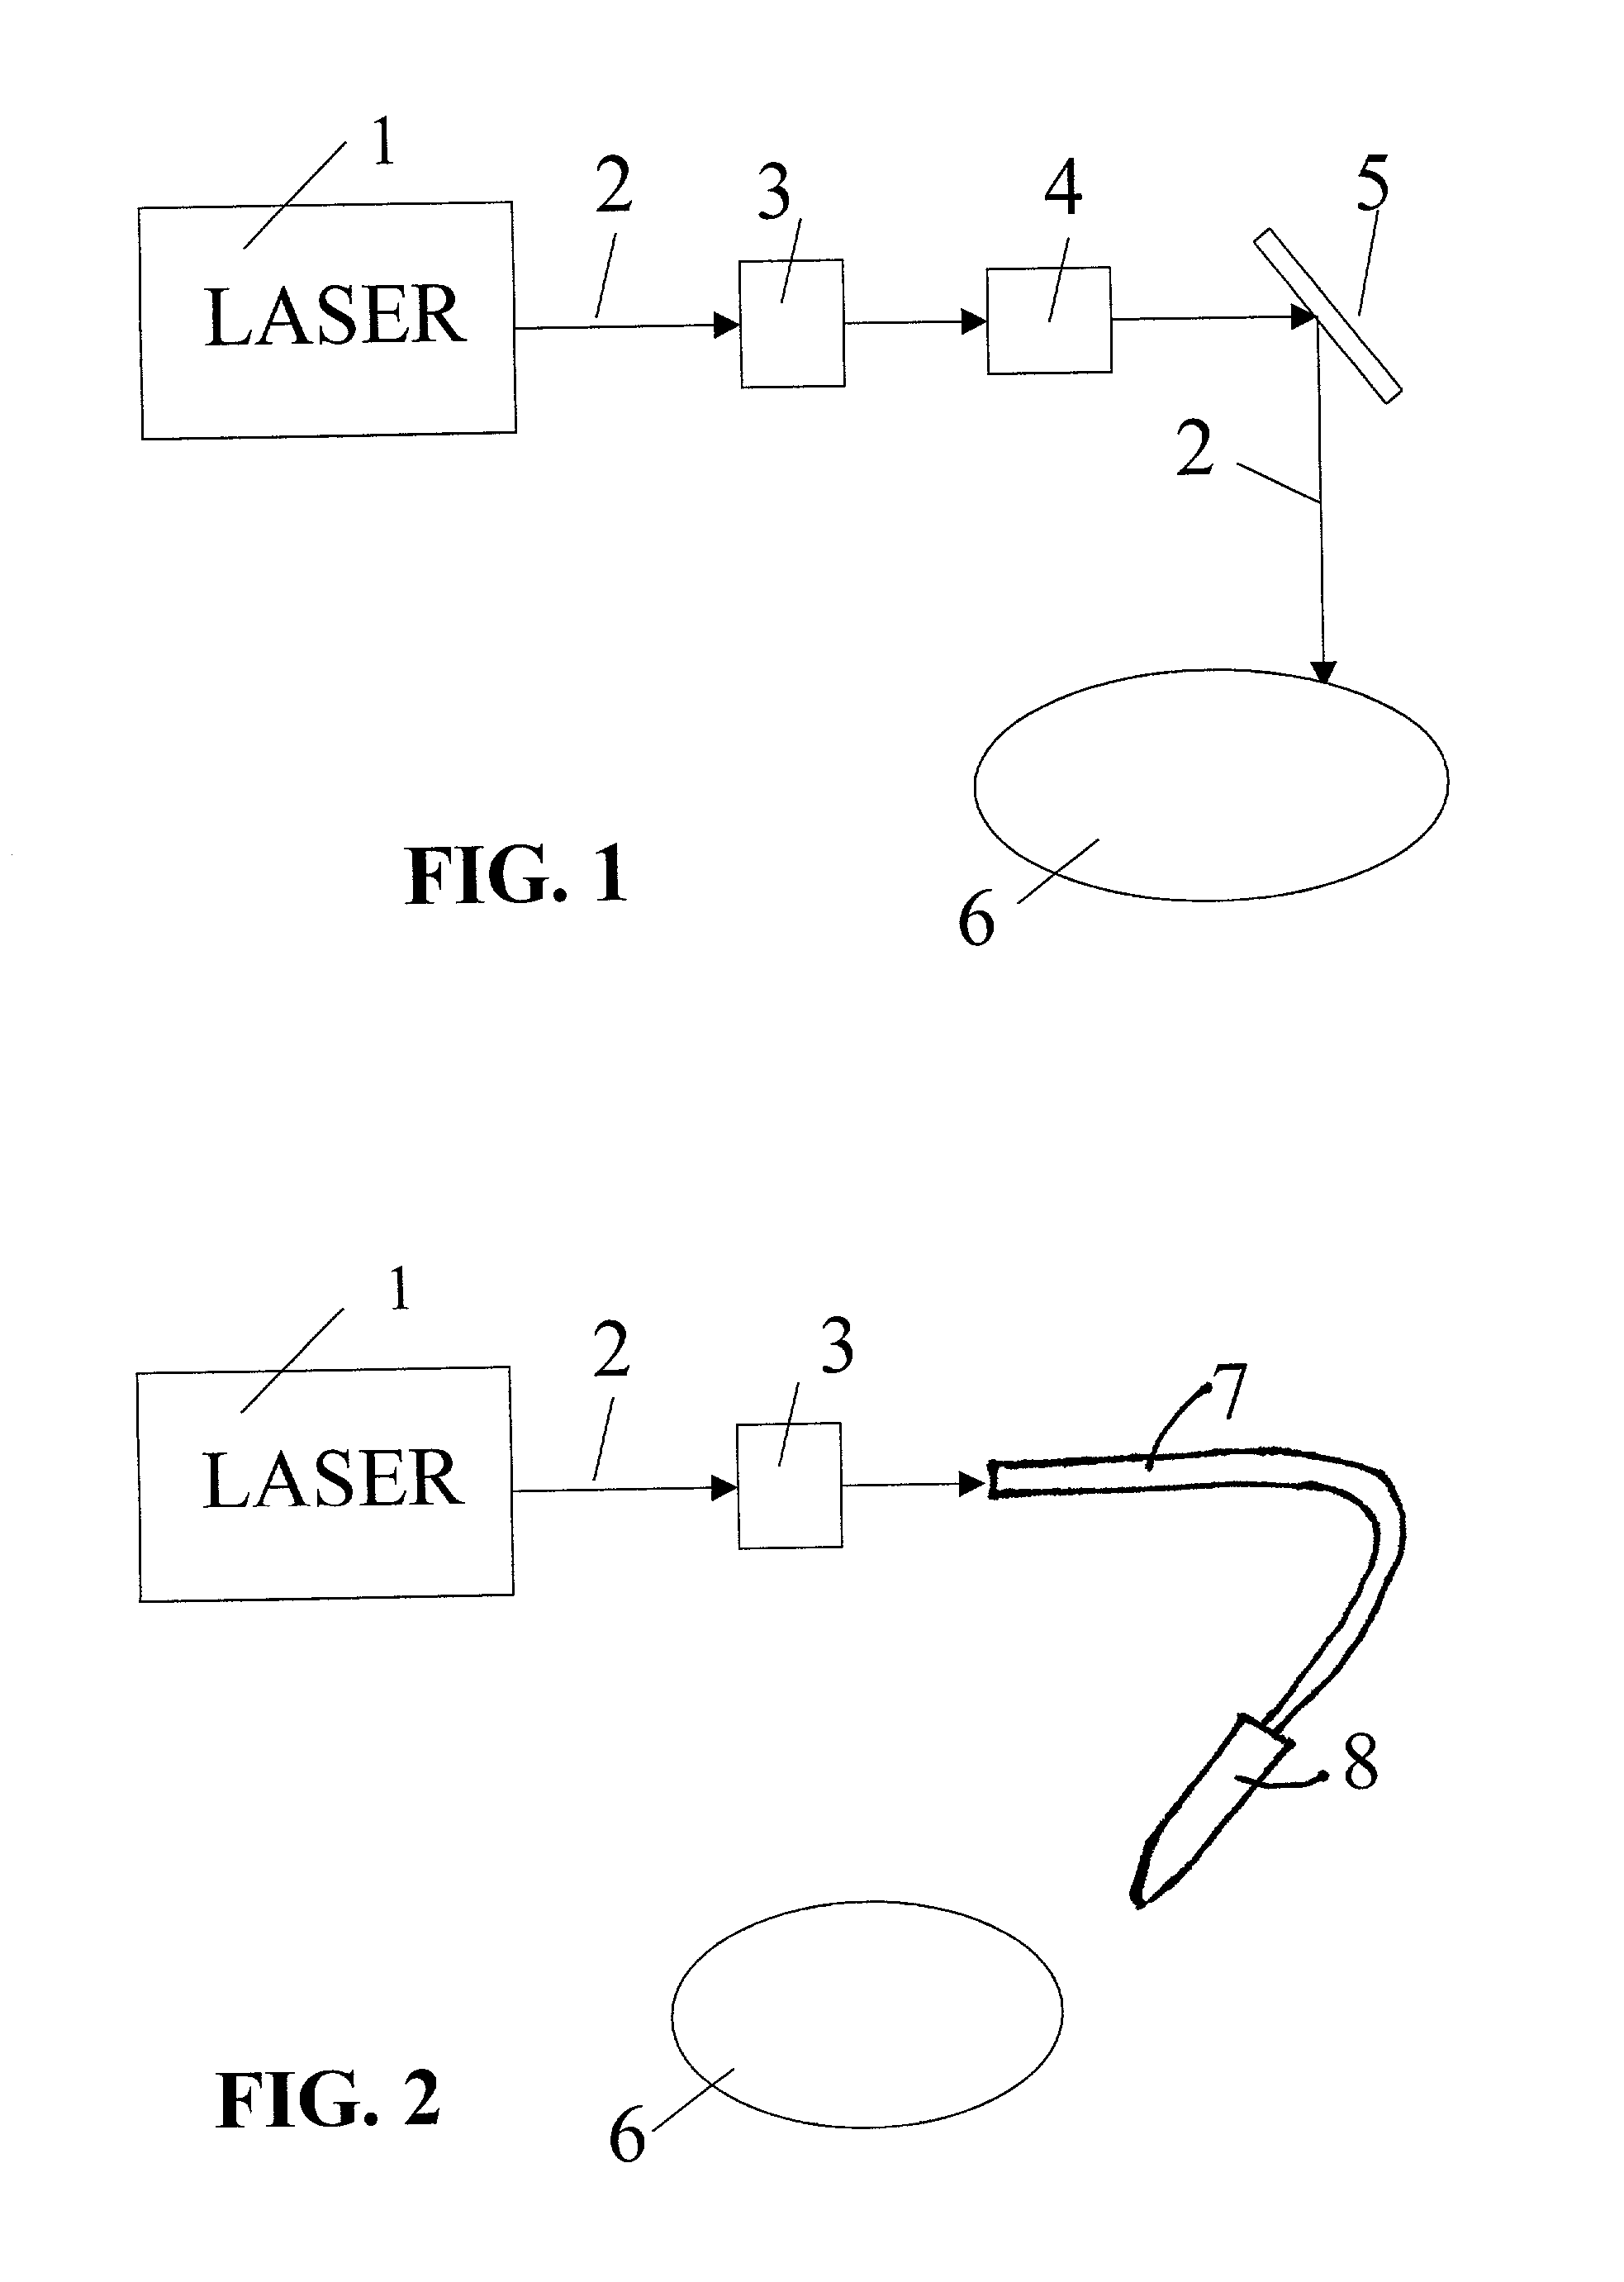 Methods and apparatus for presbyopia treatment using a scanning laser system